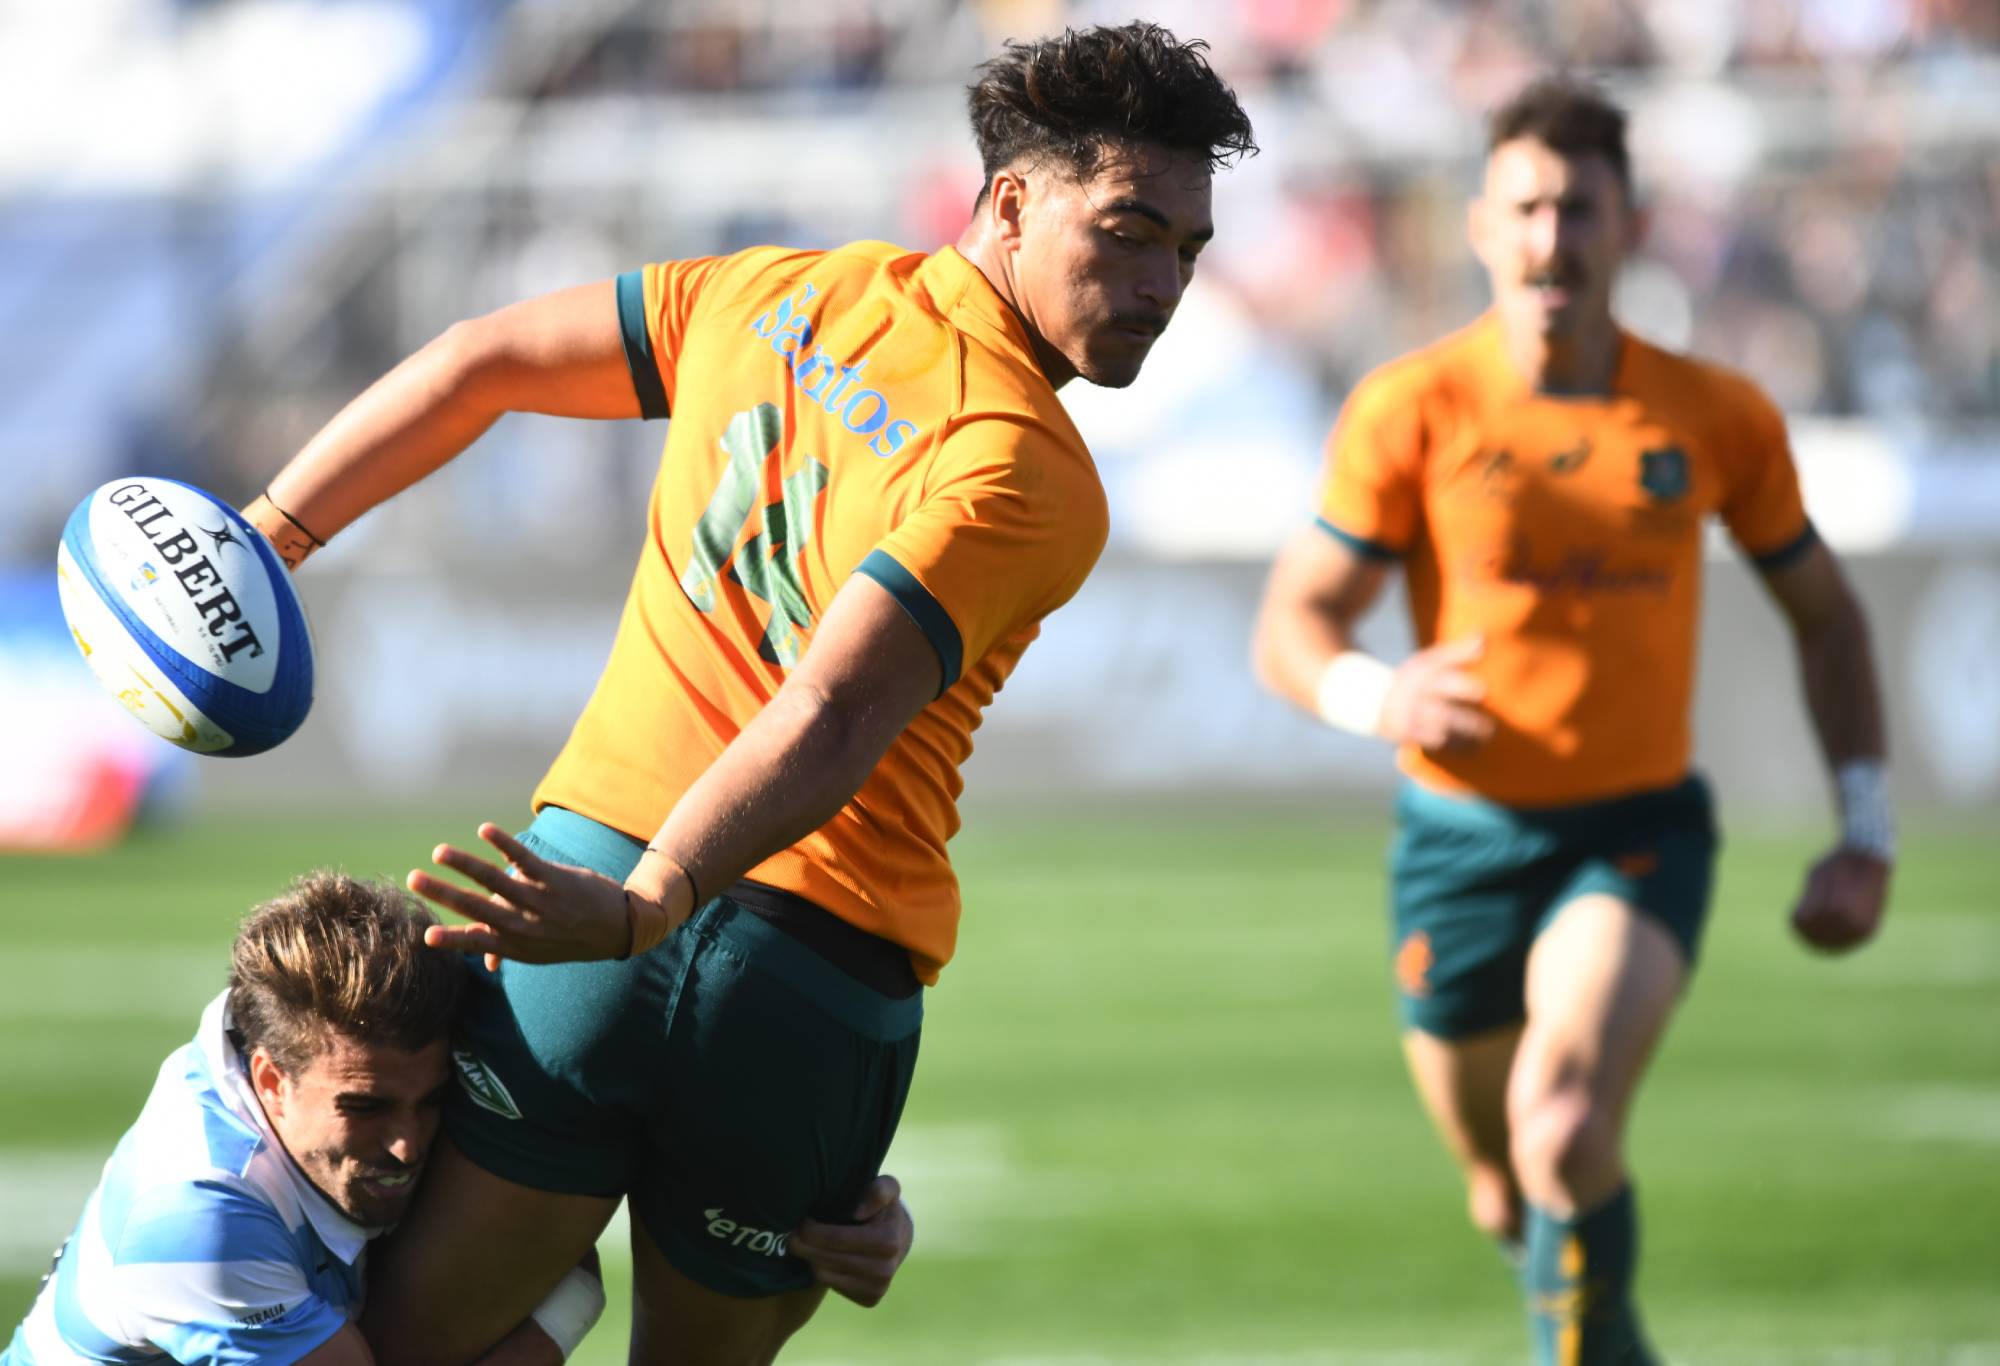 Jordan Petaia of Australia attempts to avoid a tackle during a Rugby Championship match between Argentina Pumas and Australian Wallabies at San Juan del Bicentenario Stadium on August 13, 2022 in San Juan, Argentina. (Photo by Rodrigo Valle/Getty Images)